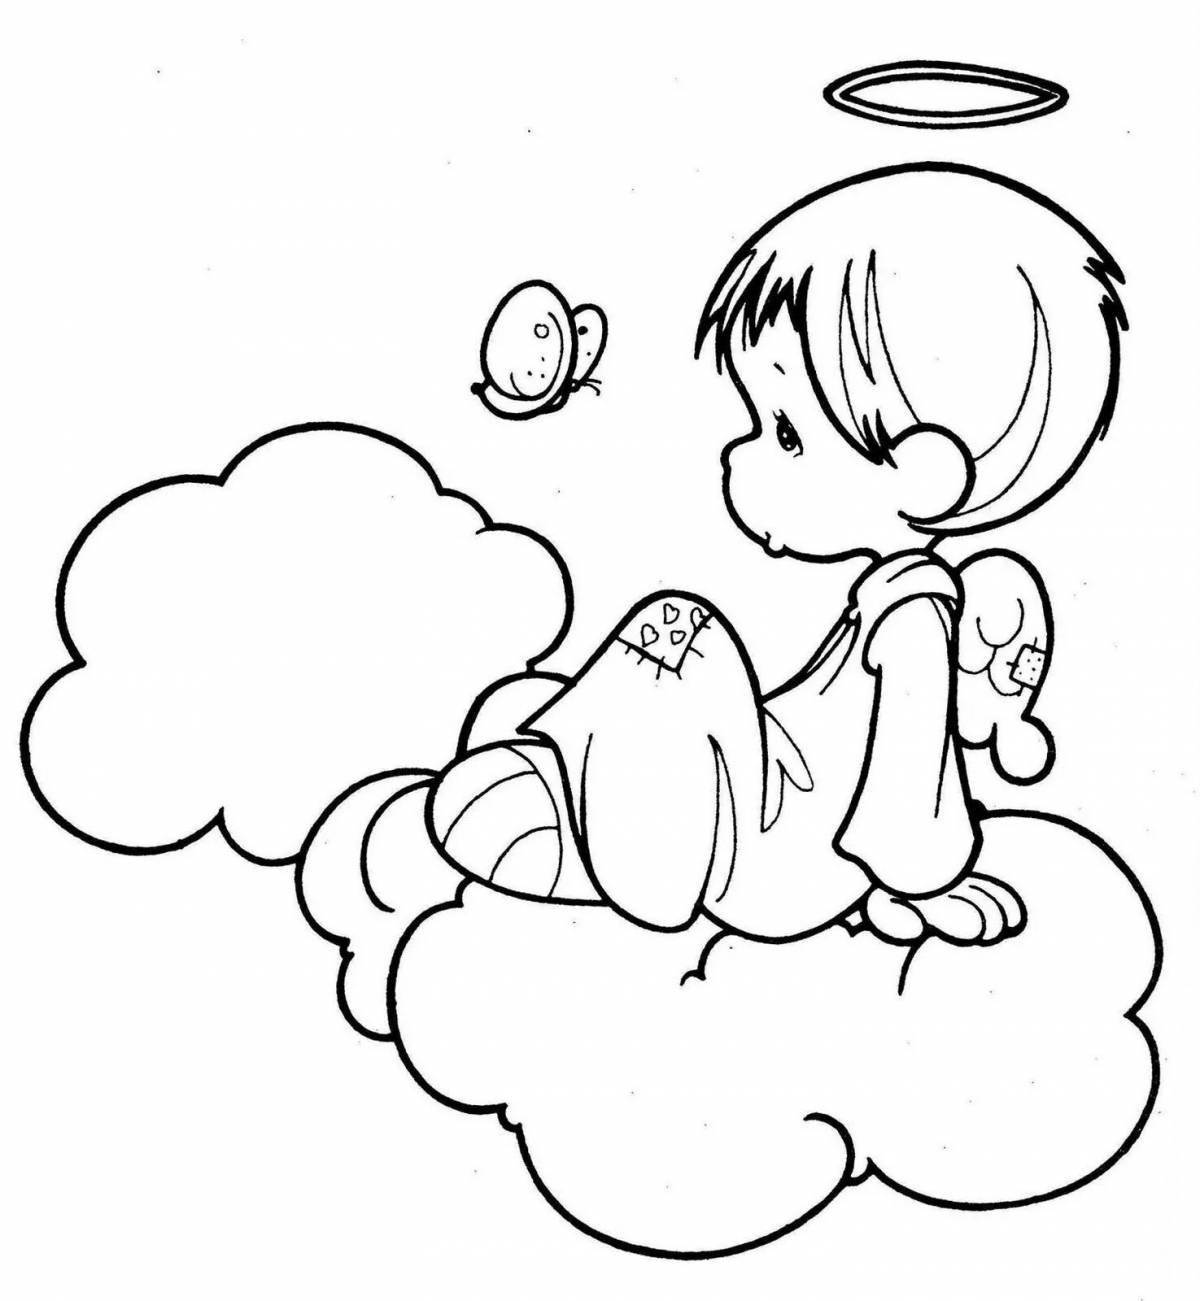 Angel with heavenly guidance coloring page